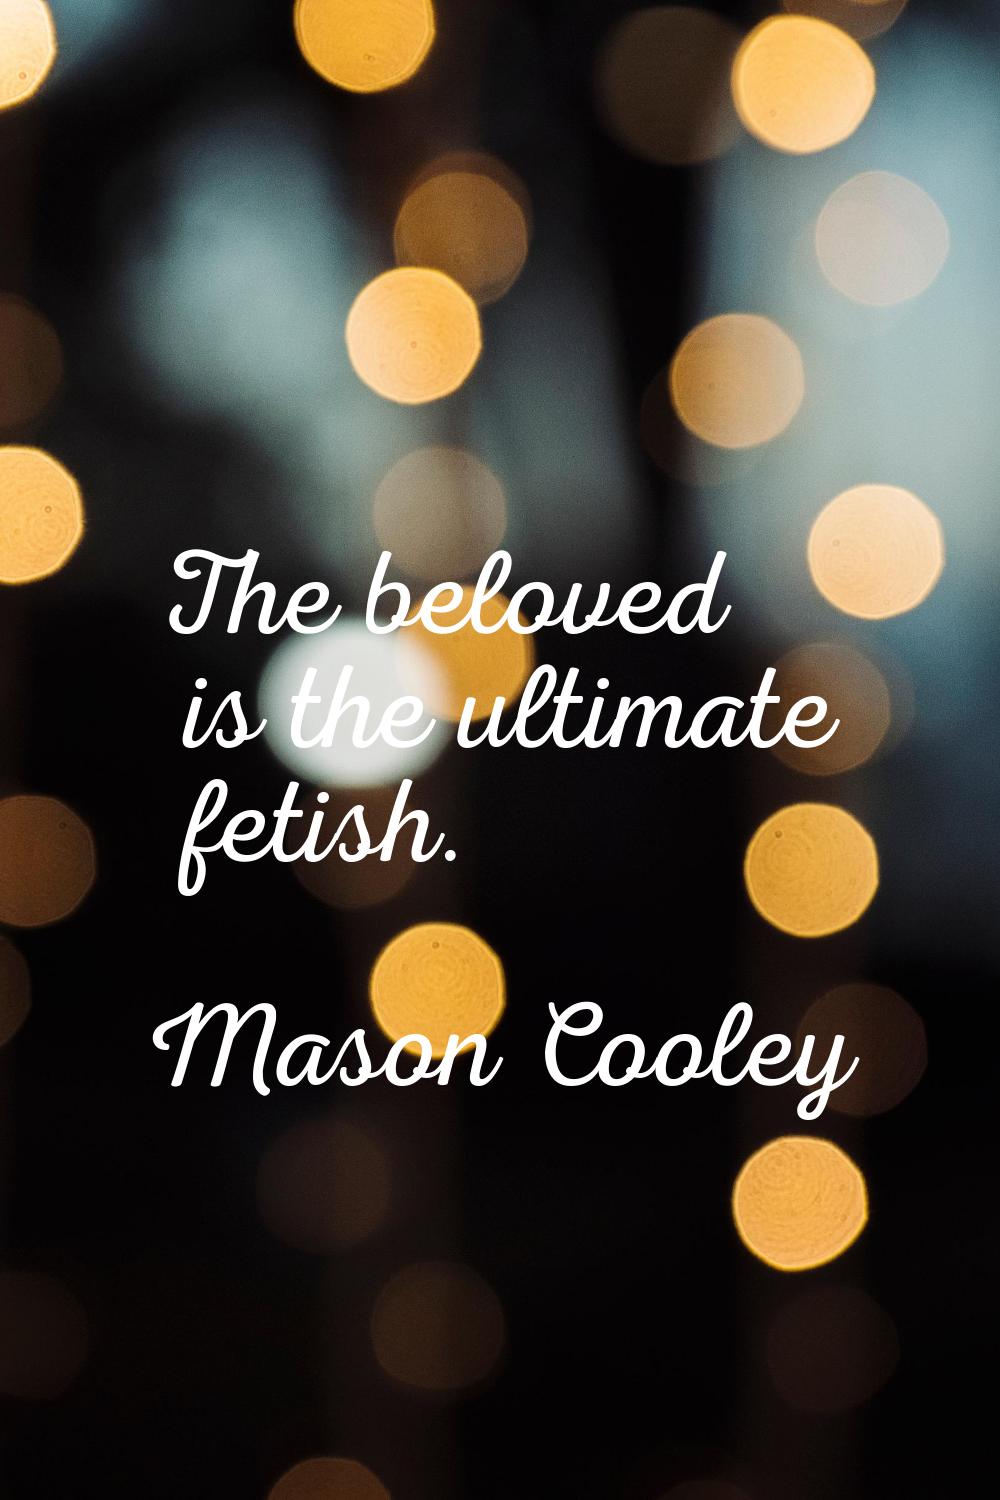 The beloved is the ultimate fetish.